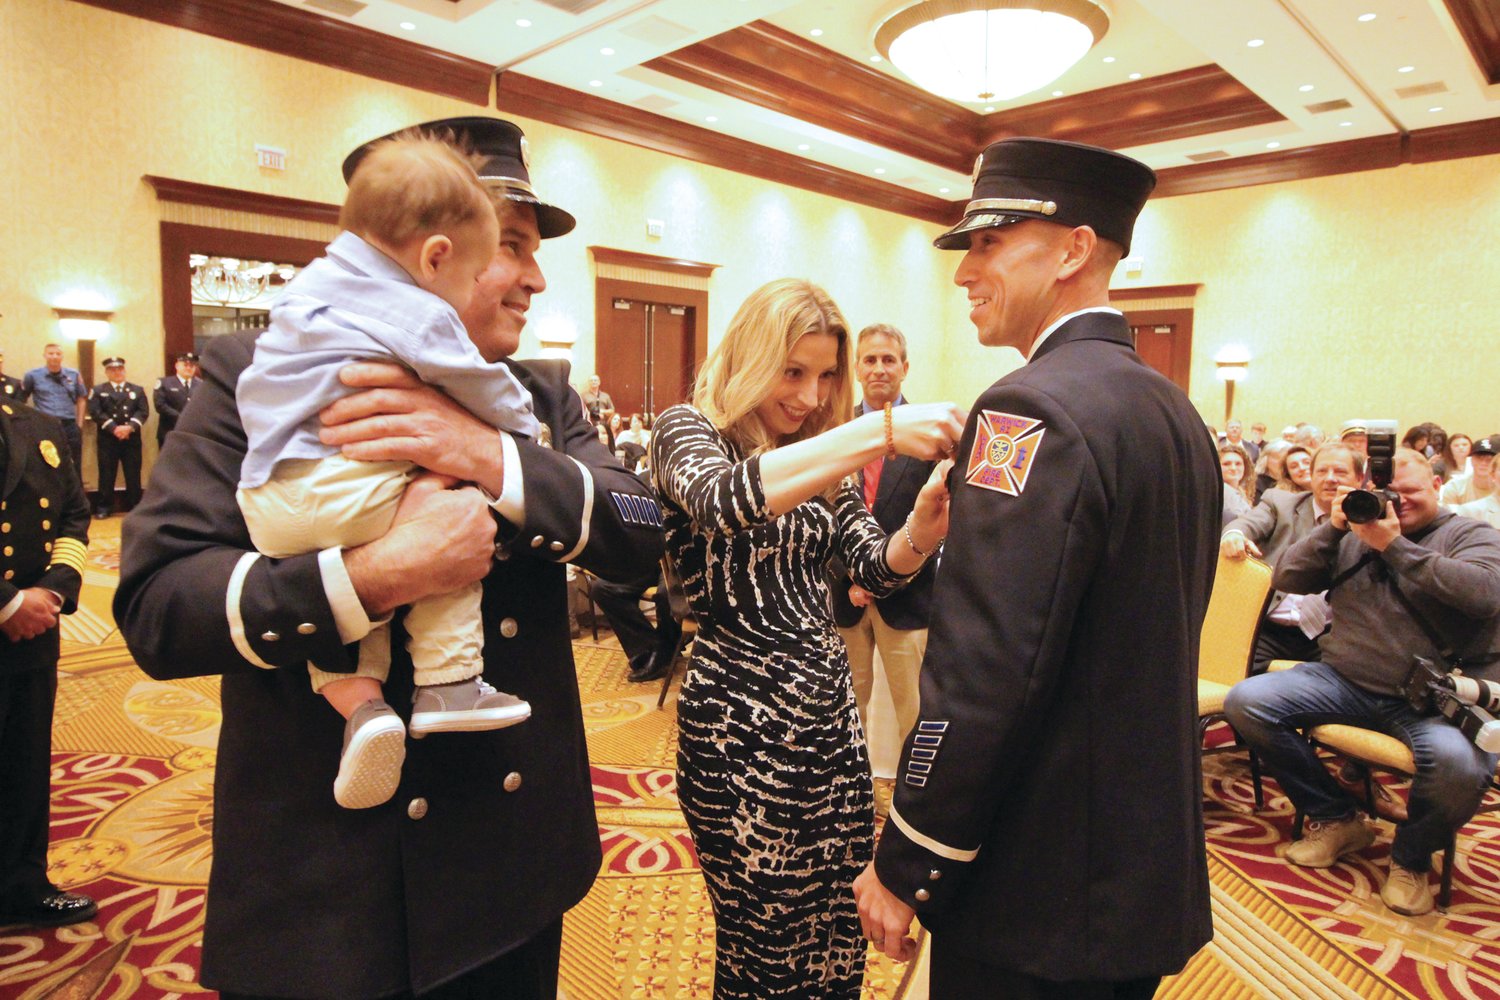 WHAT IT TAKES TO BE PINNED: Lt. Michael Boynton Jr., who served as master of ceremonies, is pinned by his wife, Deonna. Looking on is his father, Warwick Fire Lt. Michael Boynton Sr., who is holding his grandson, Calvin.